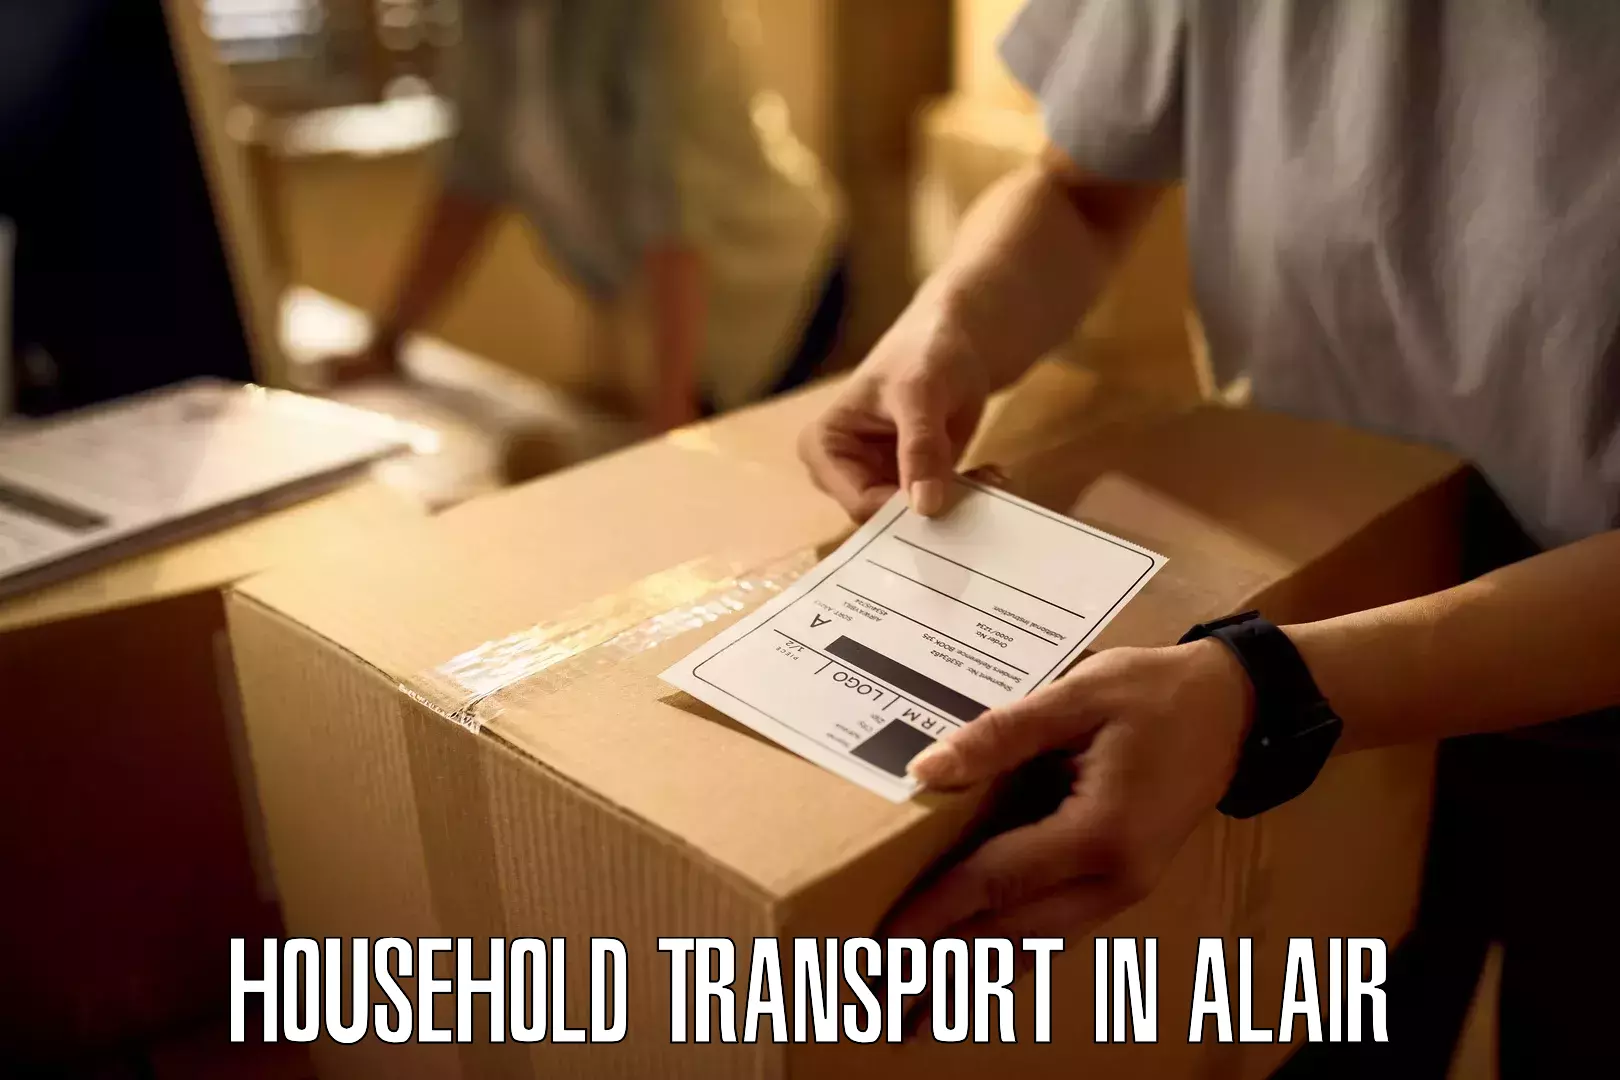 Furniture moving and handling in Alair